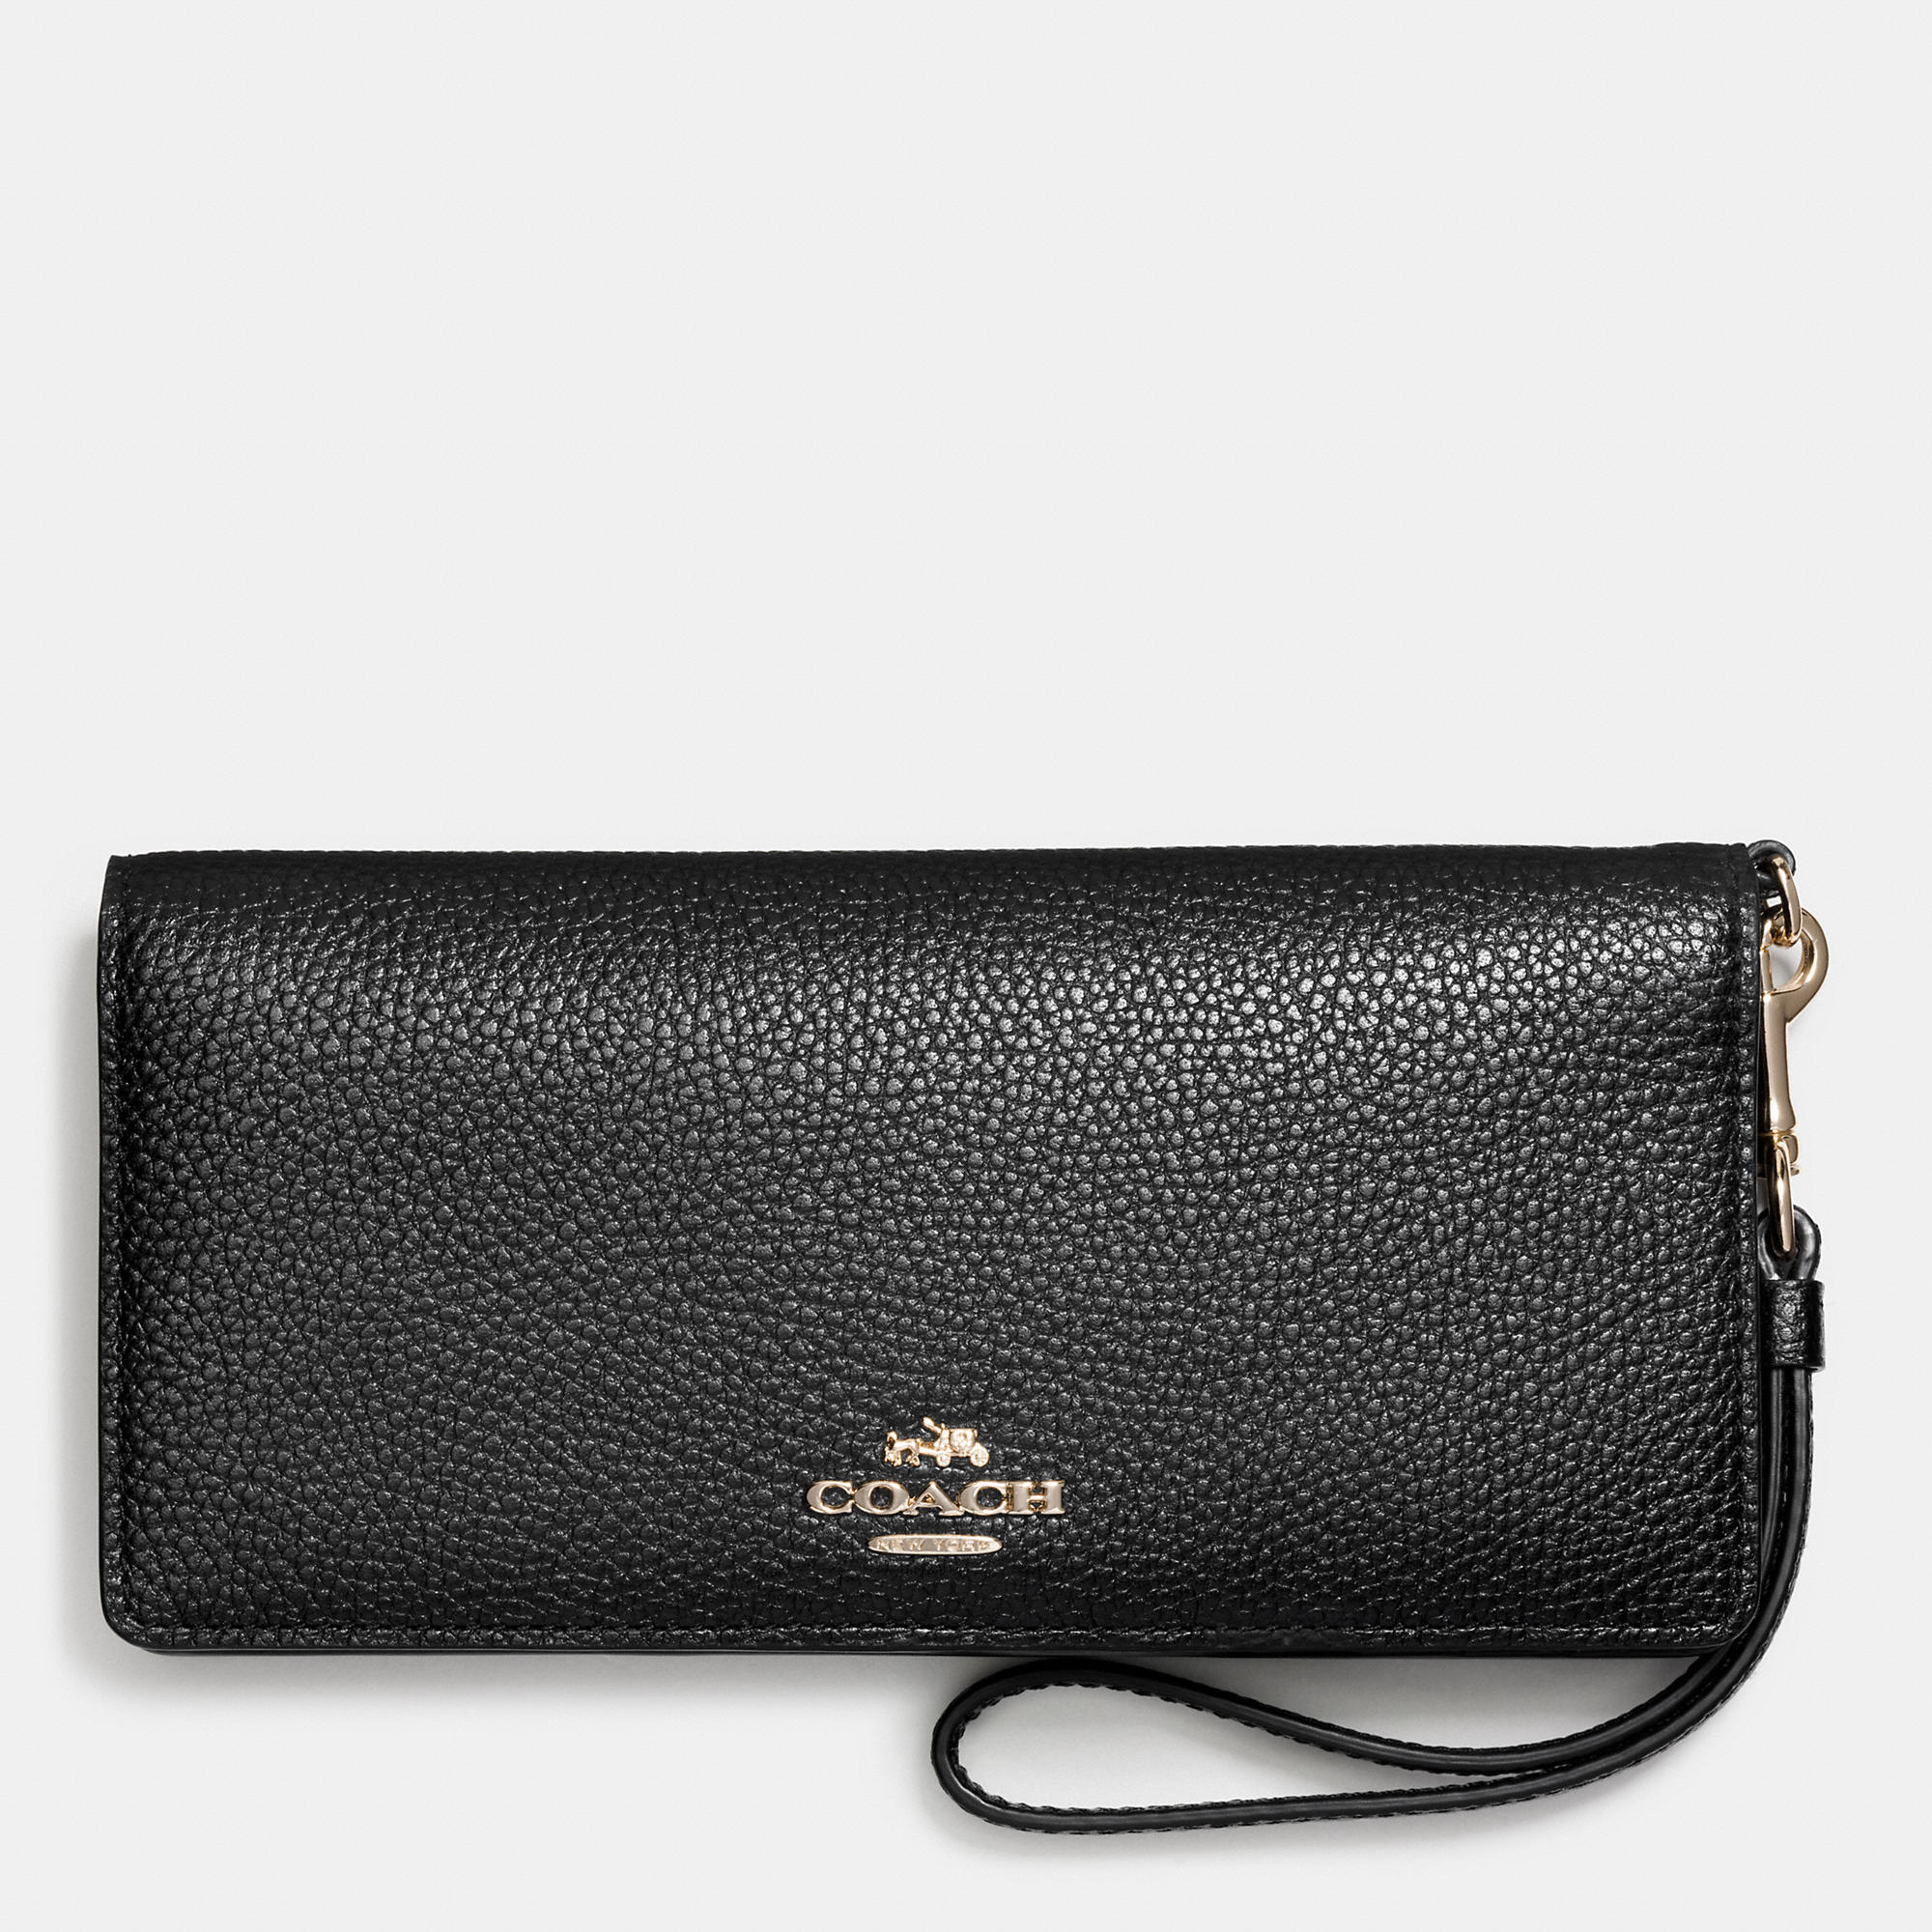 Brand Coach Slim Wallet In Pebble Leather | Coach Outlet Canada